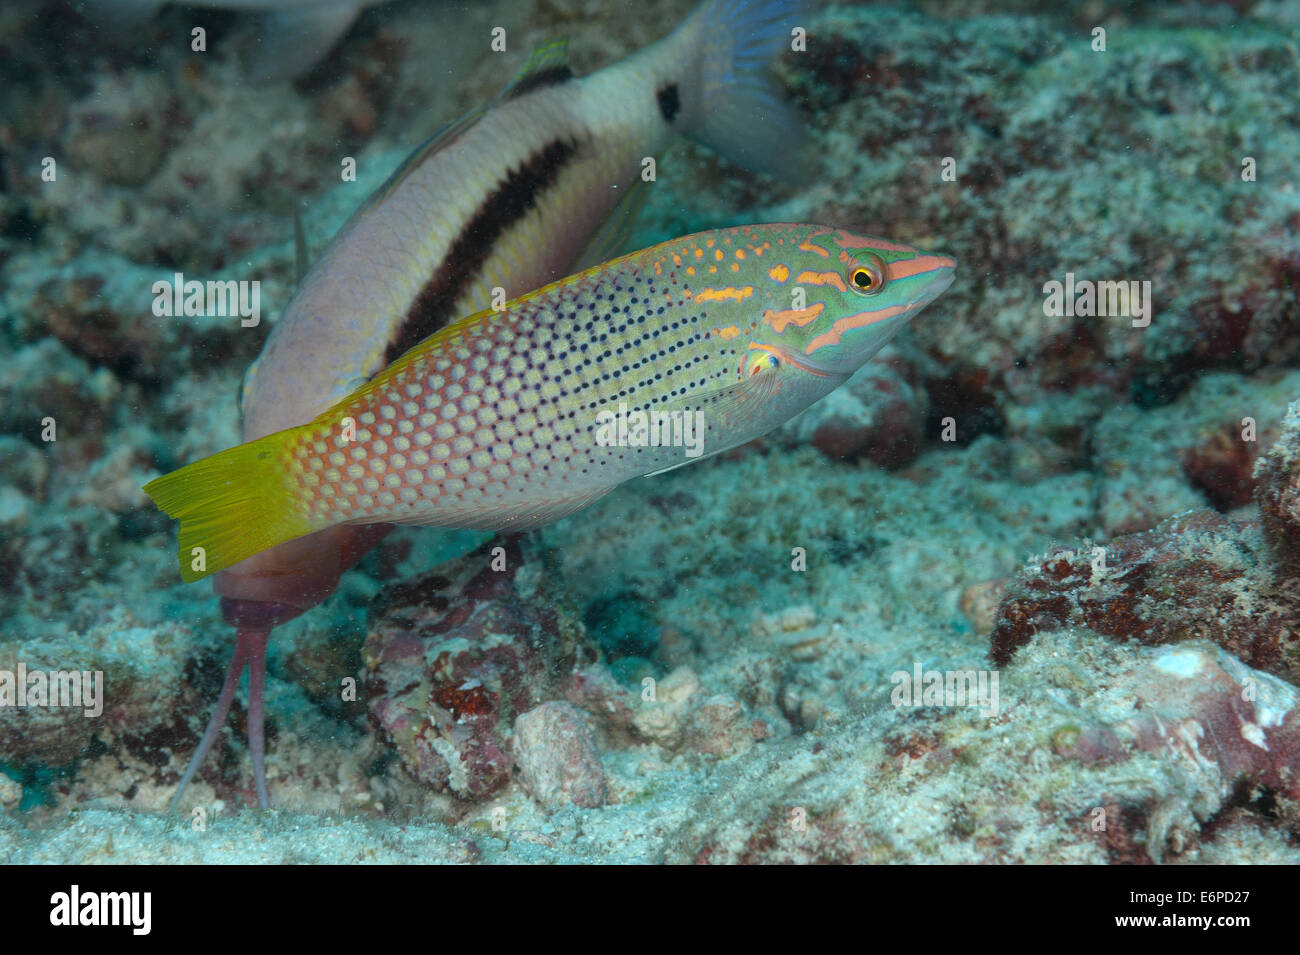 Ornate wrasse in Maldives, Indian Ocean Stock Photo